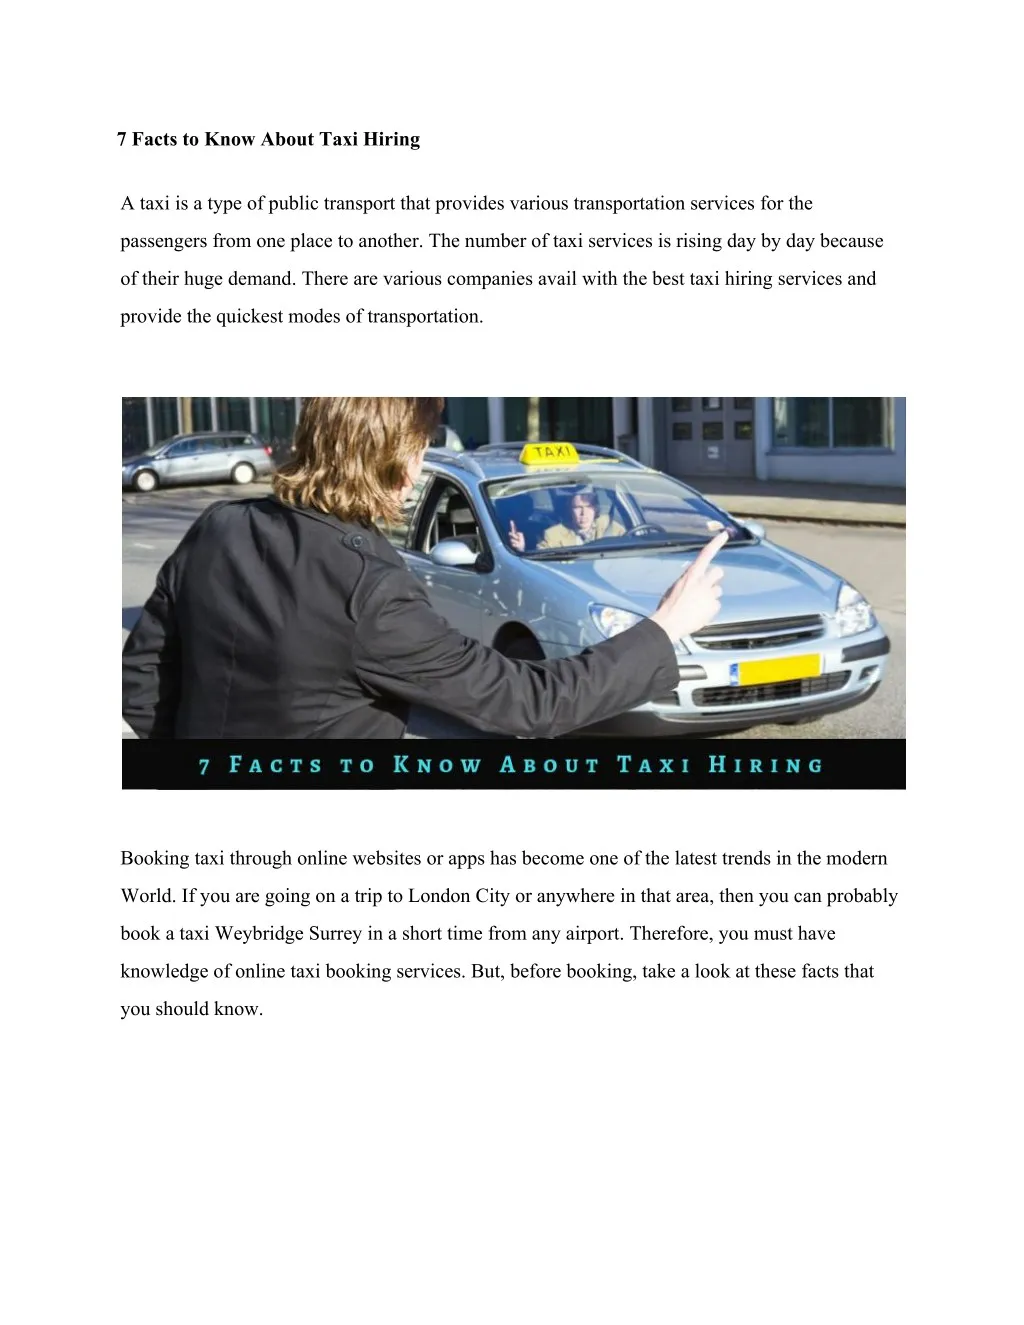 7 facts to know about taxi hiring